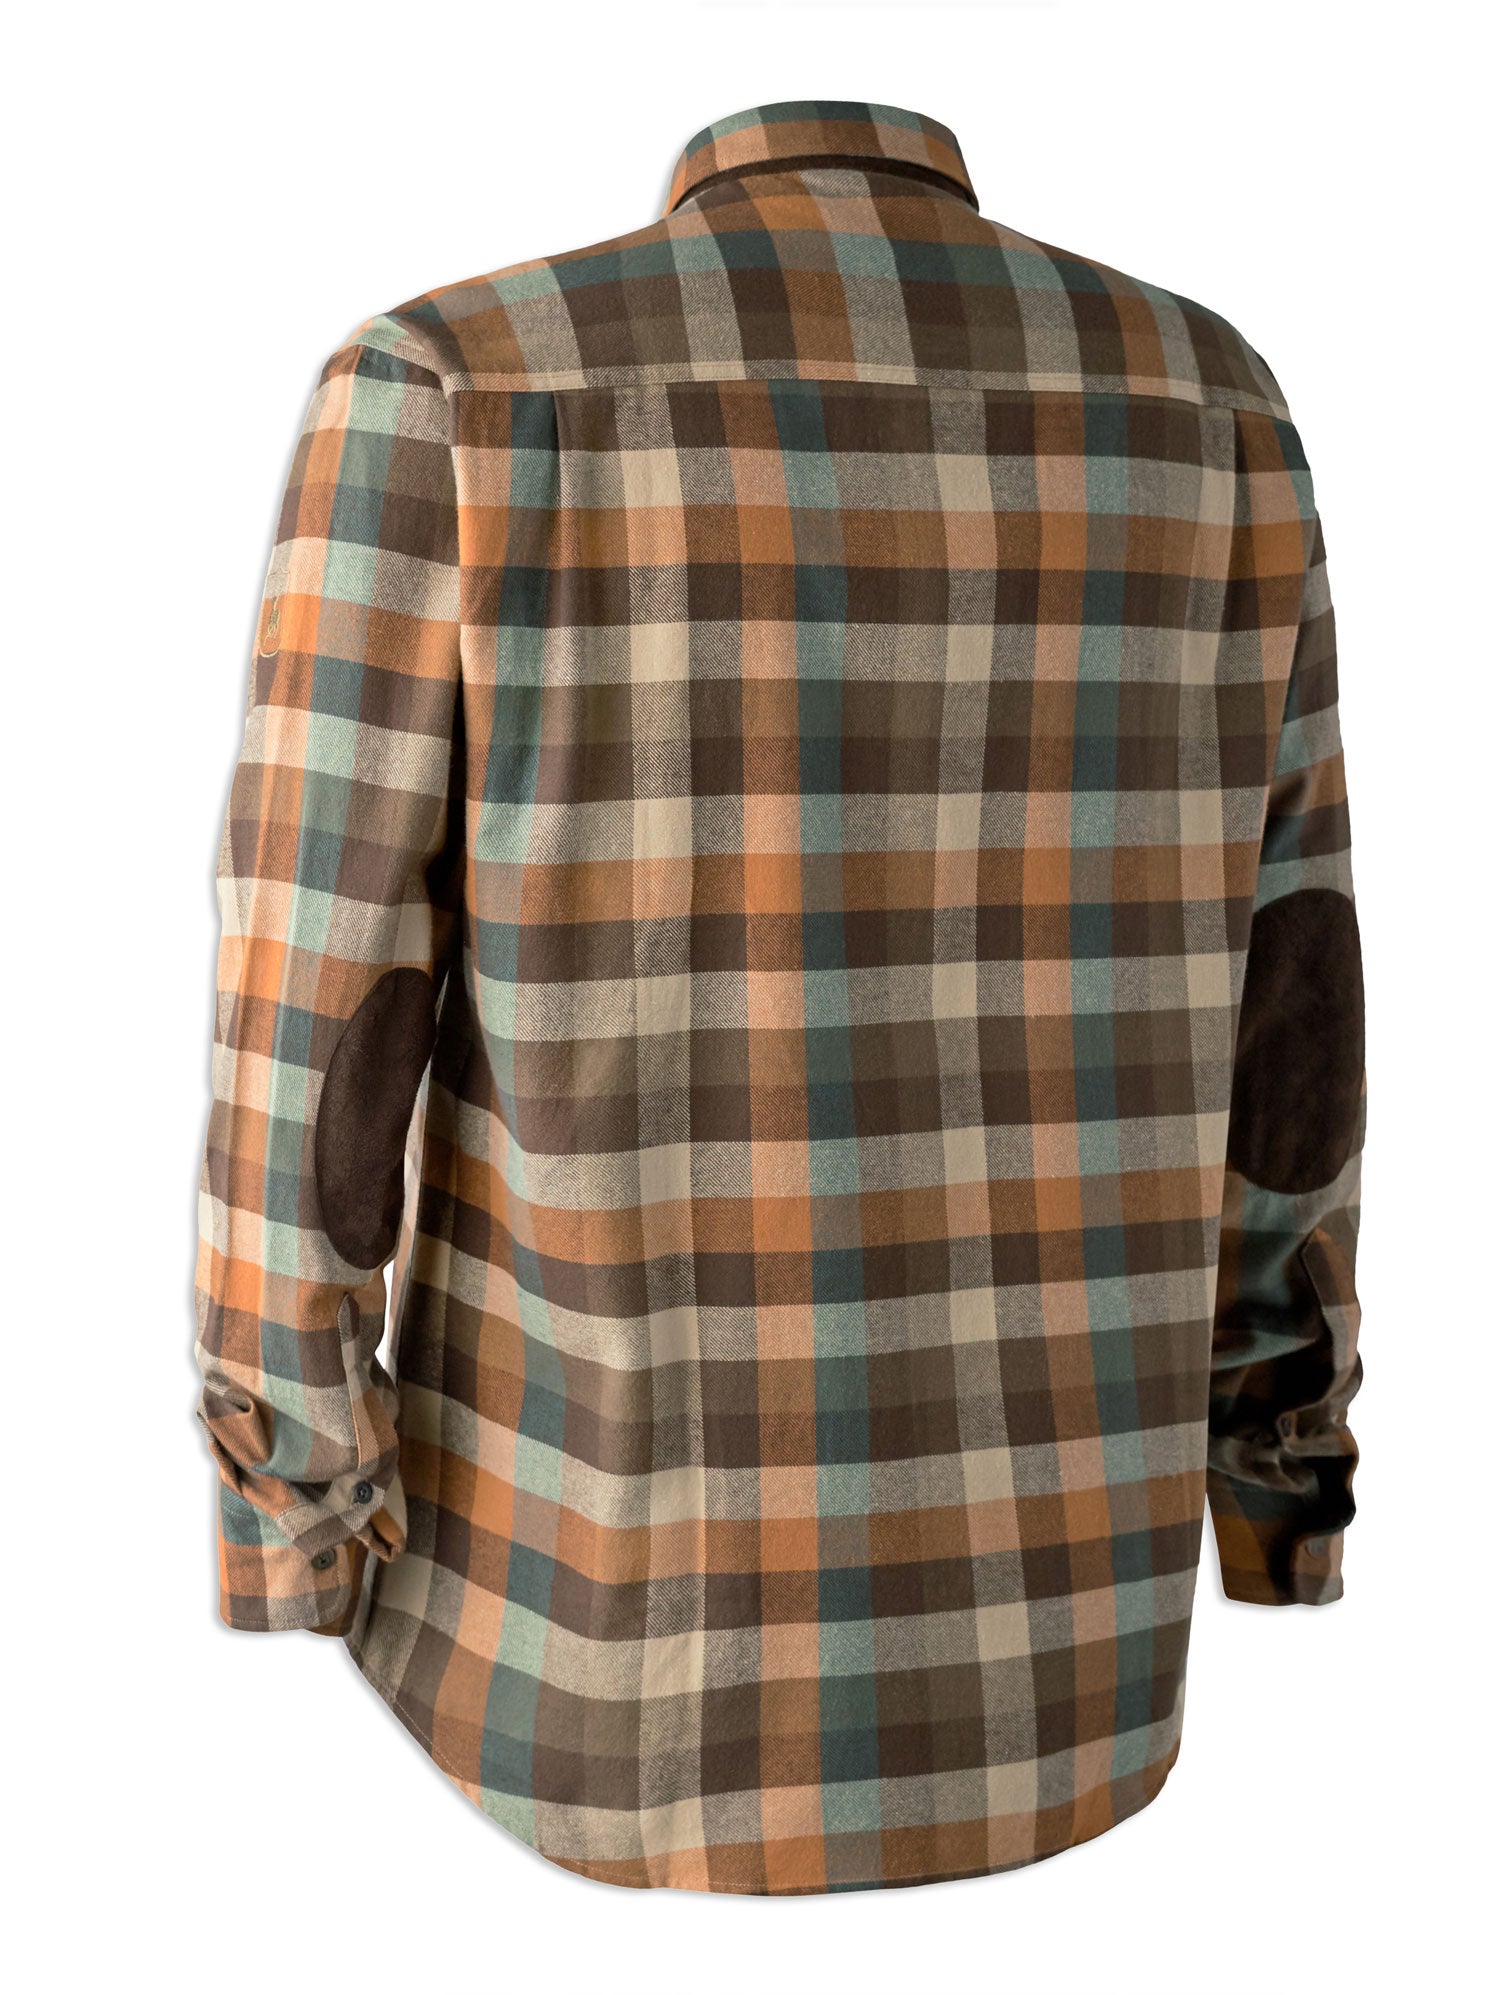 Back Deerhunter James Tartan Shirt with Suede Patches